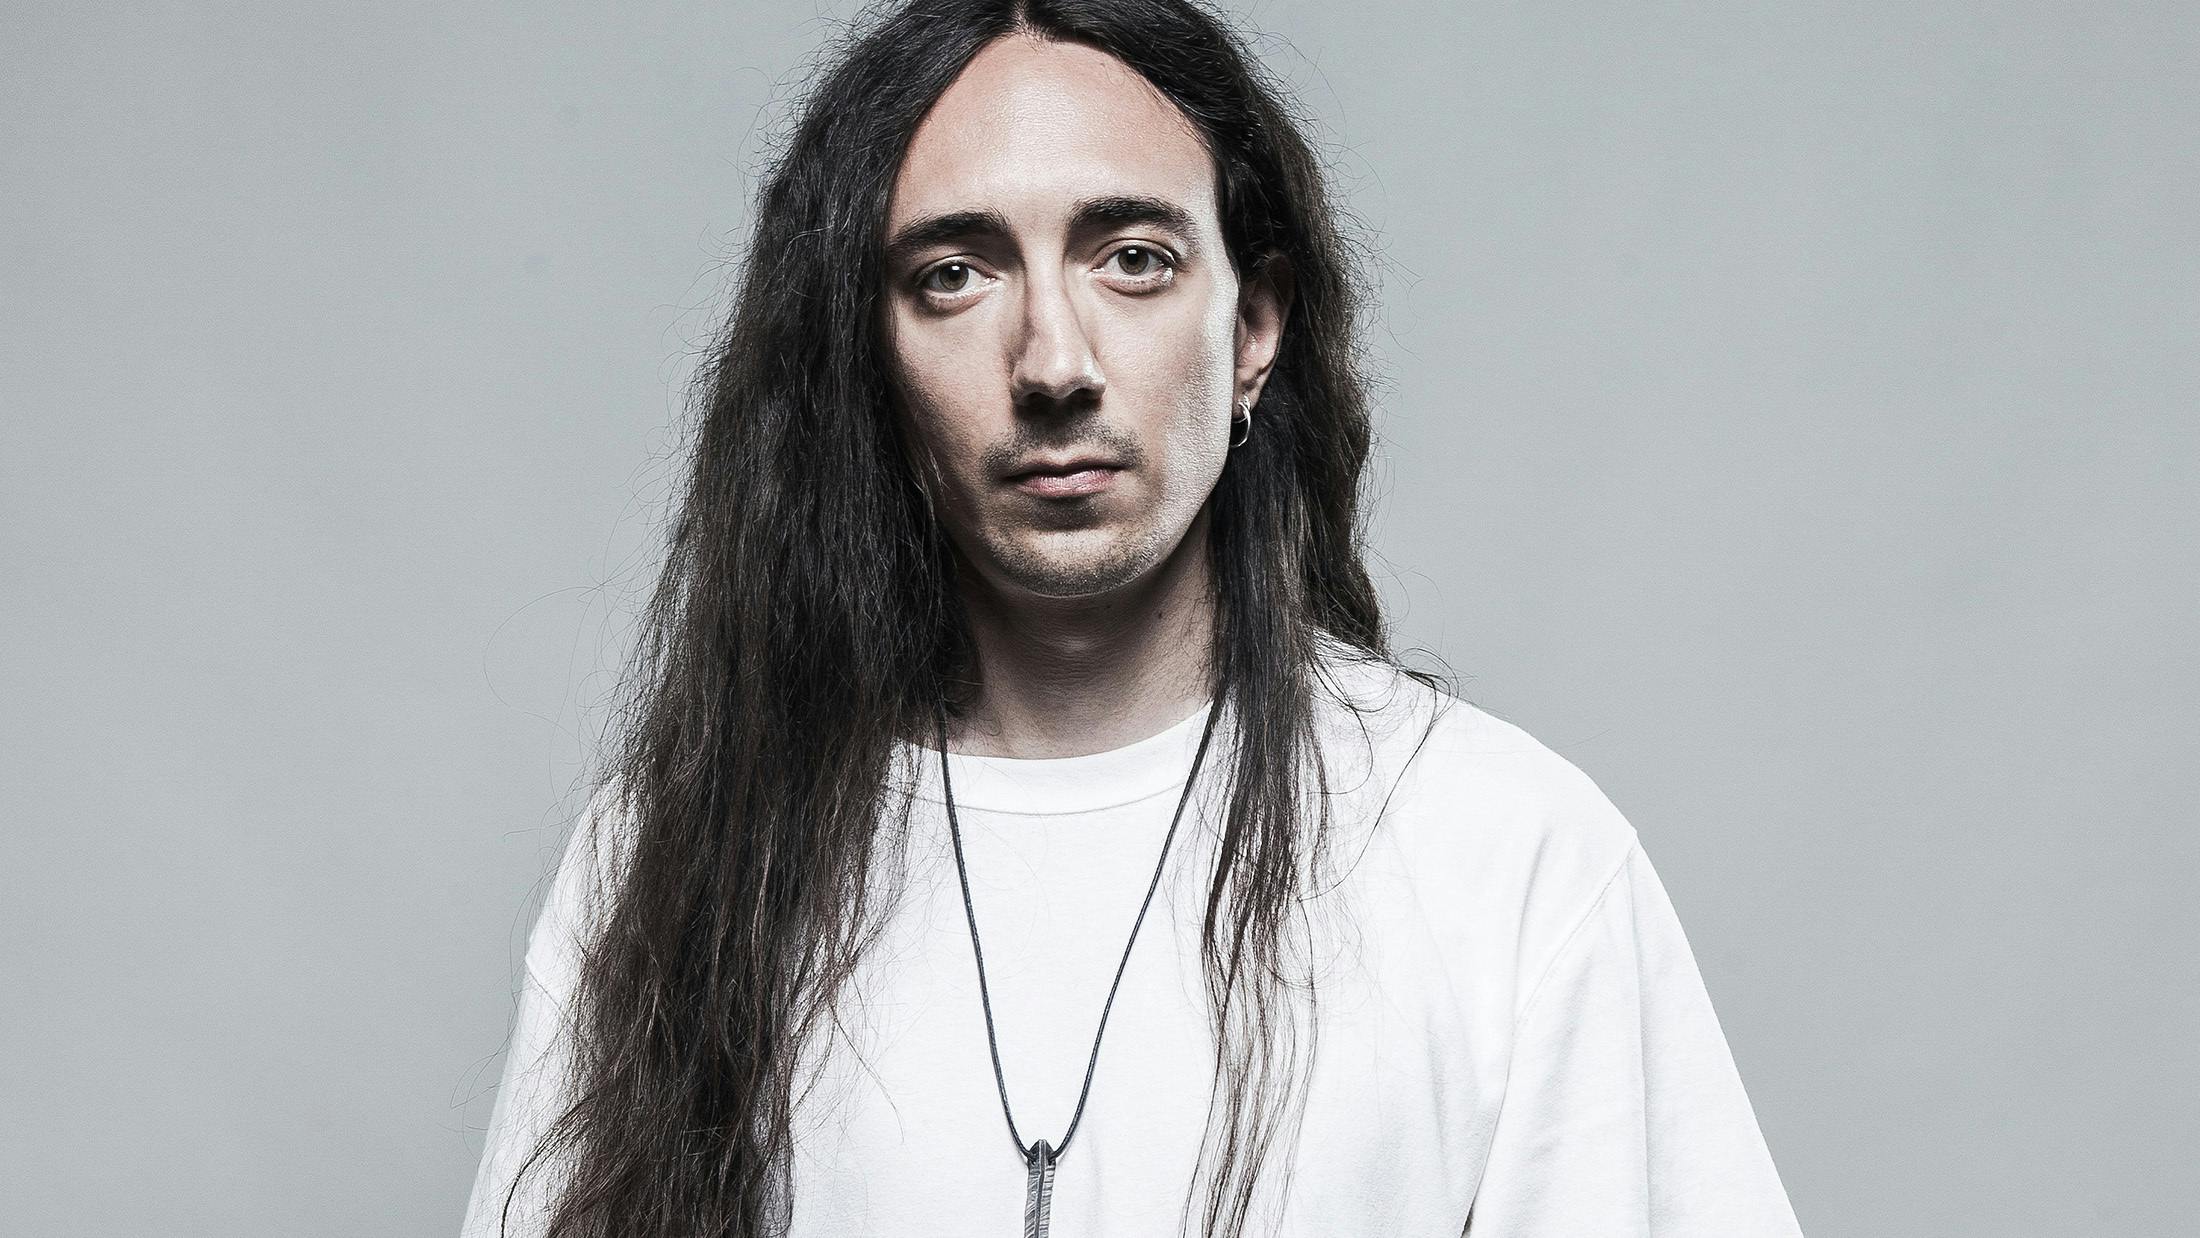 "If My House Was On Fire, I'd Save My Neo Geo Console": 13 Questions With Neige From Alcest